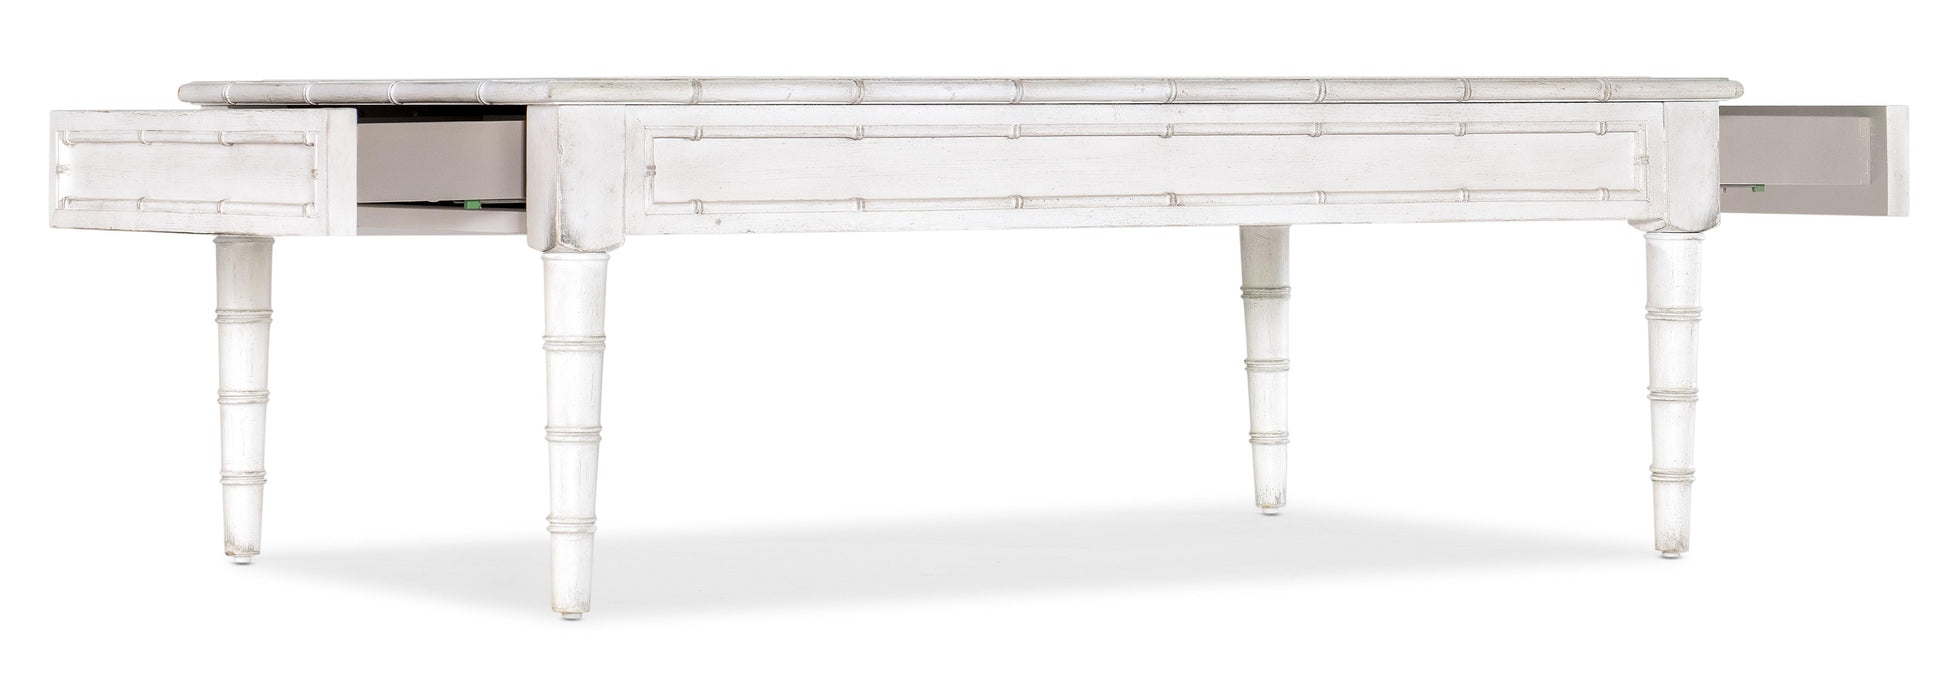 Charleston Rectangle Cocktail Table - 6750-80310-06